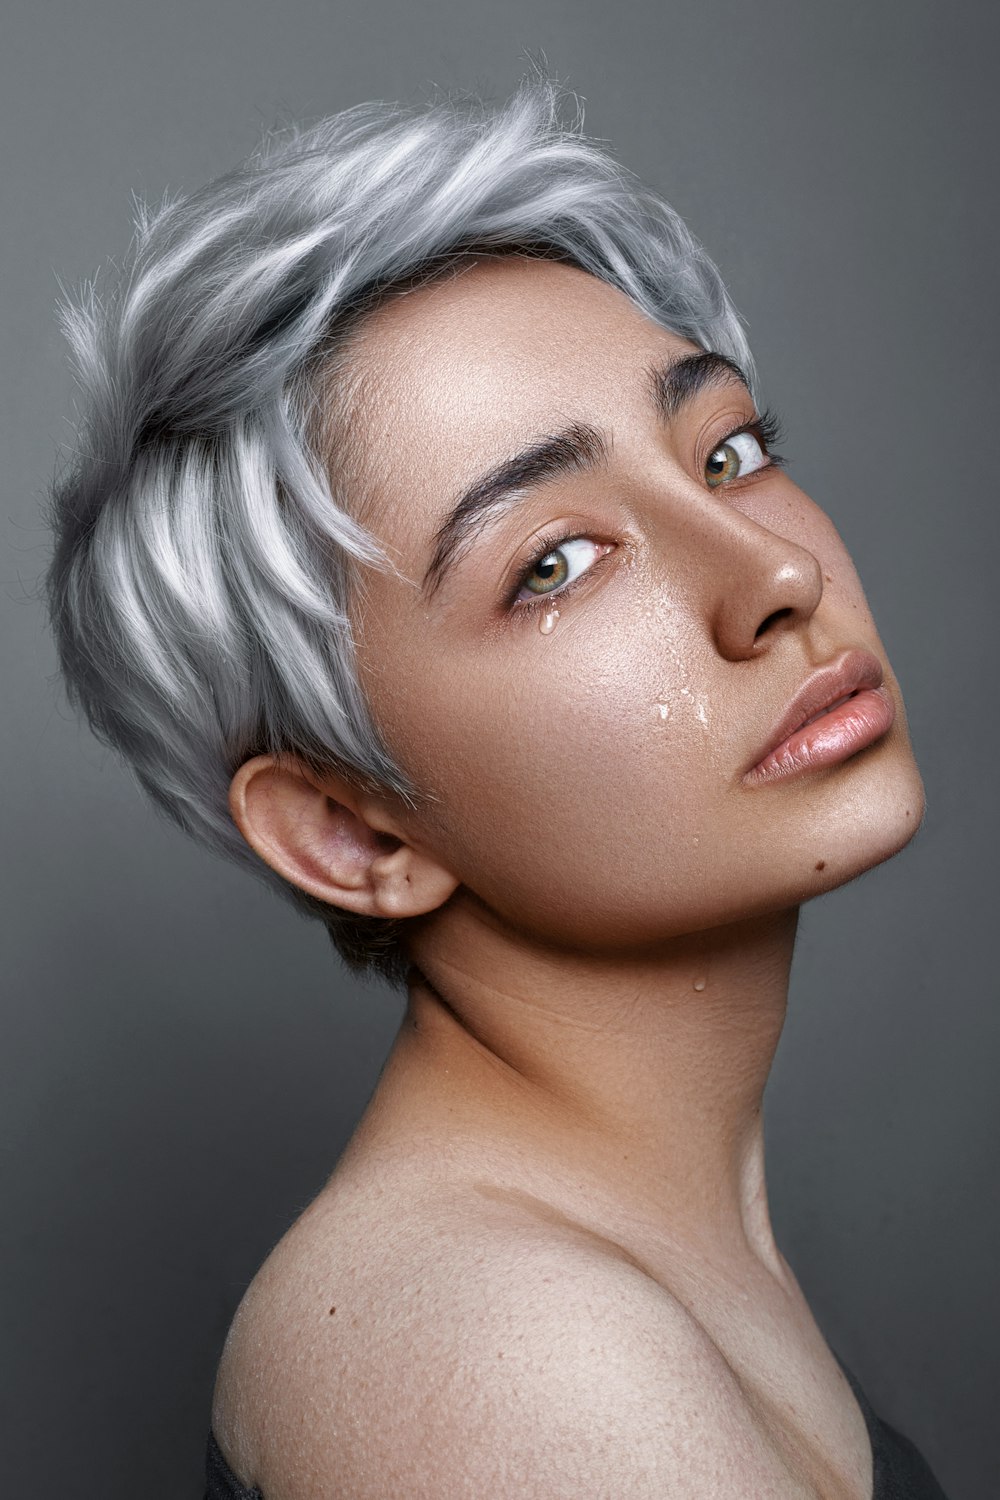 a woman with white hair and grey hair photo – Free Tehran Image on Unsplash